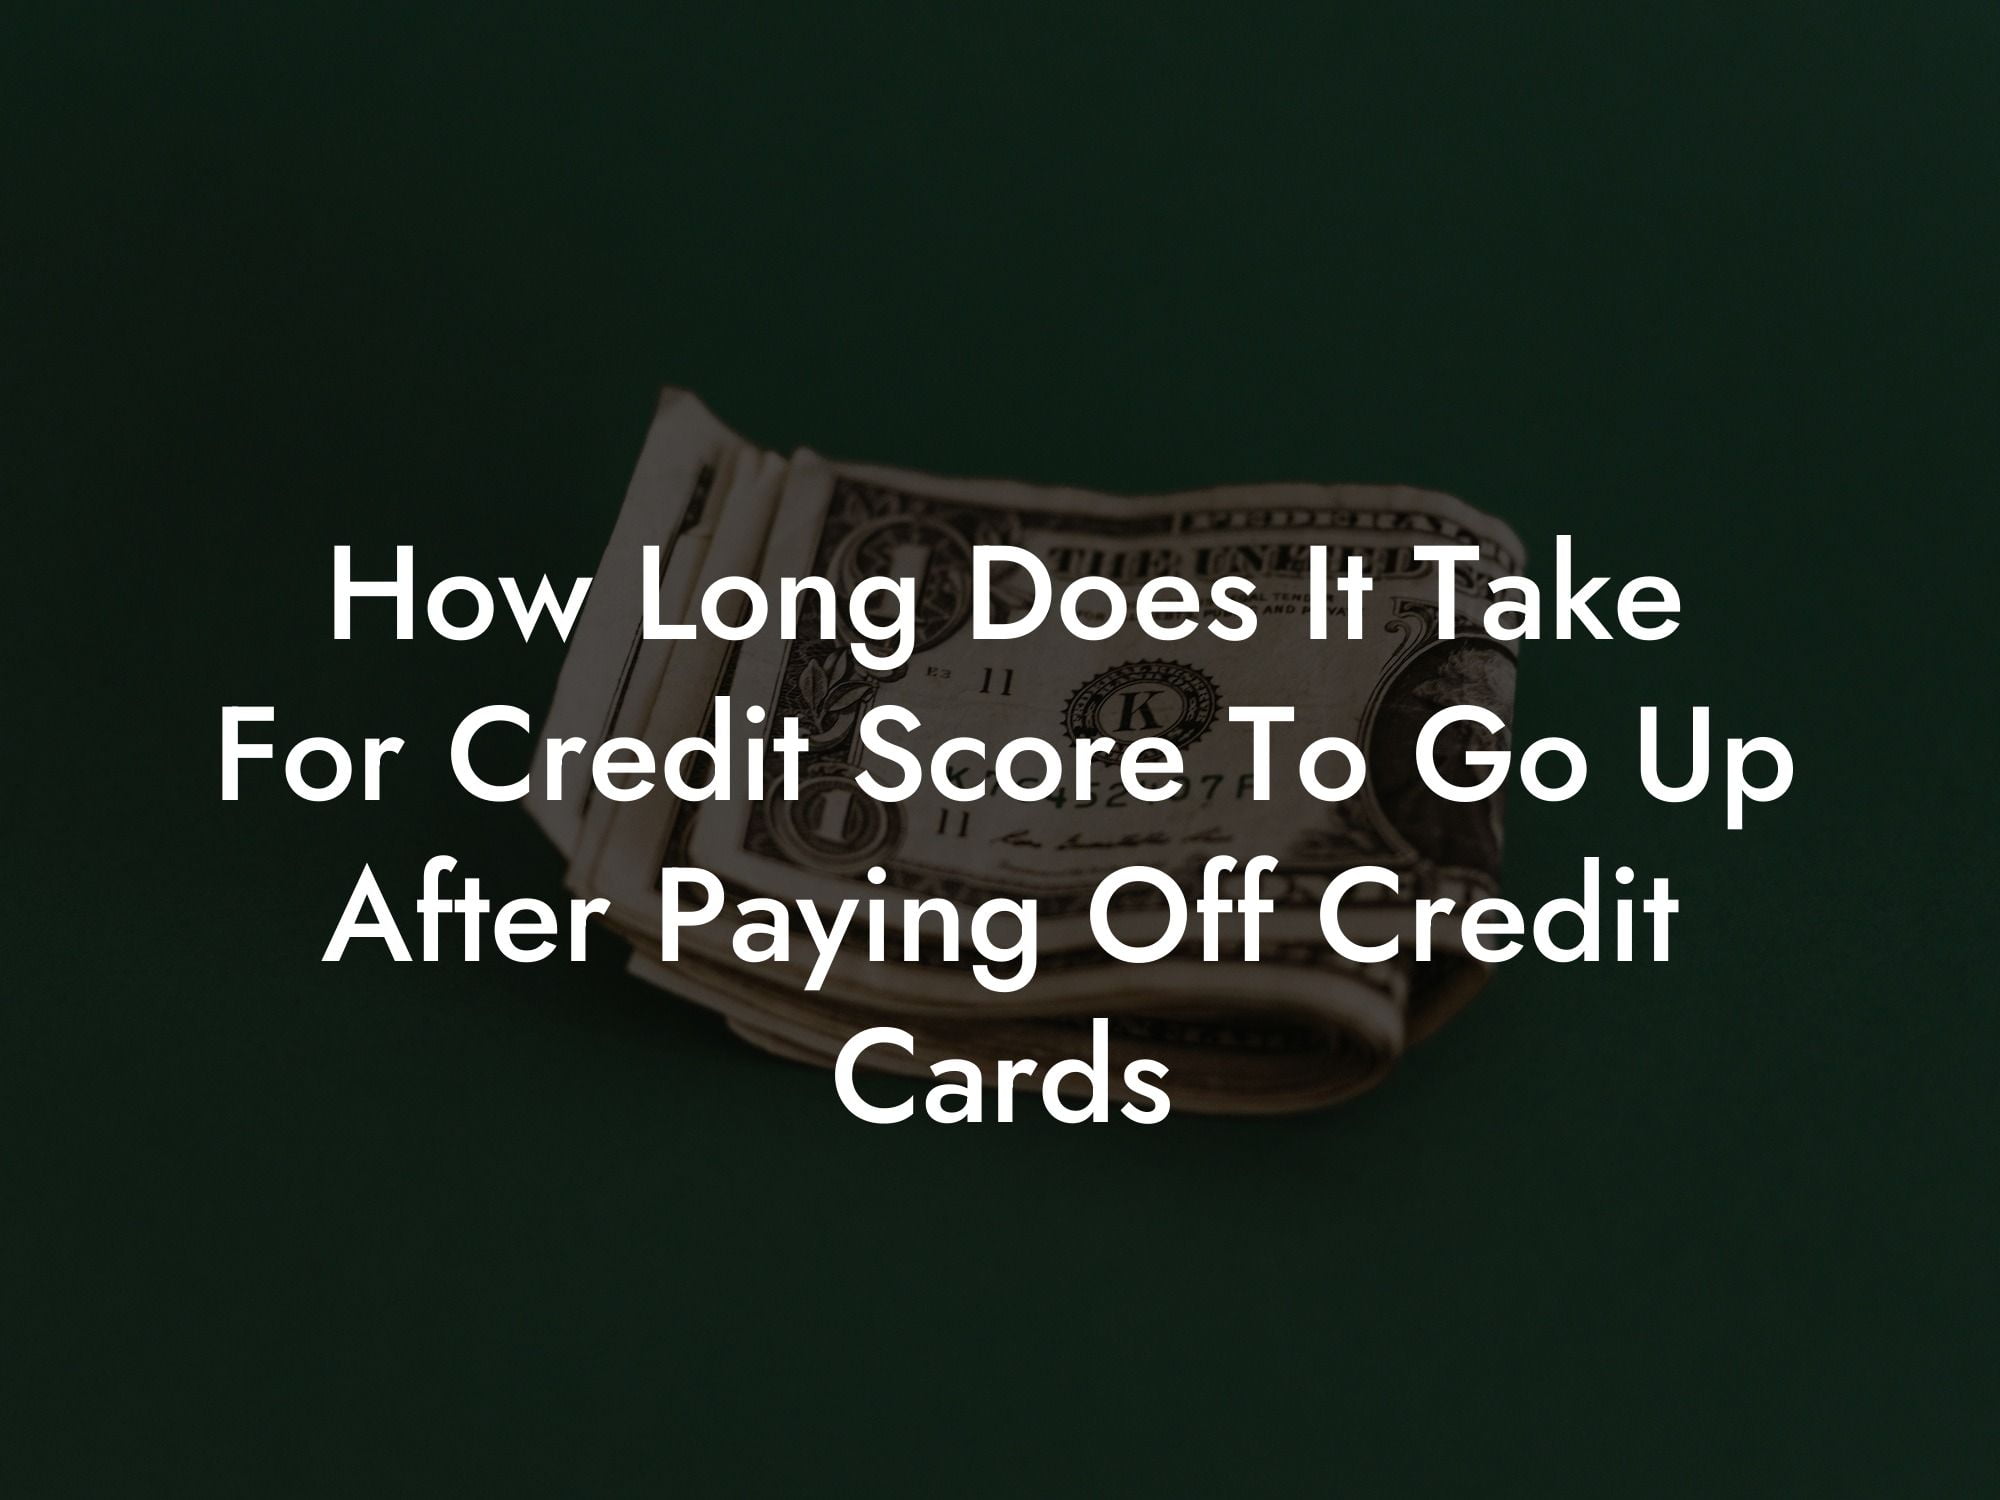 How Long Does It Take For Credit Score To Go Up After Paying Off Credit Cards